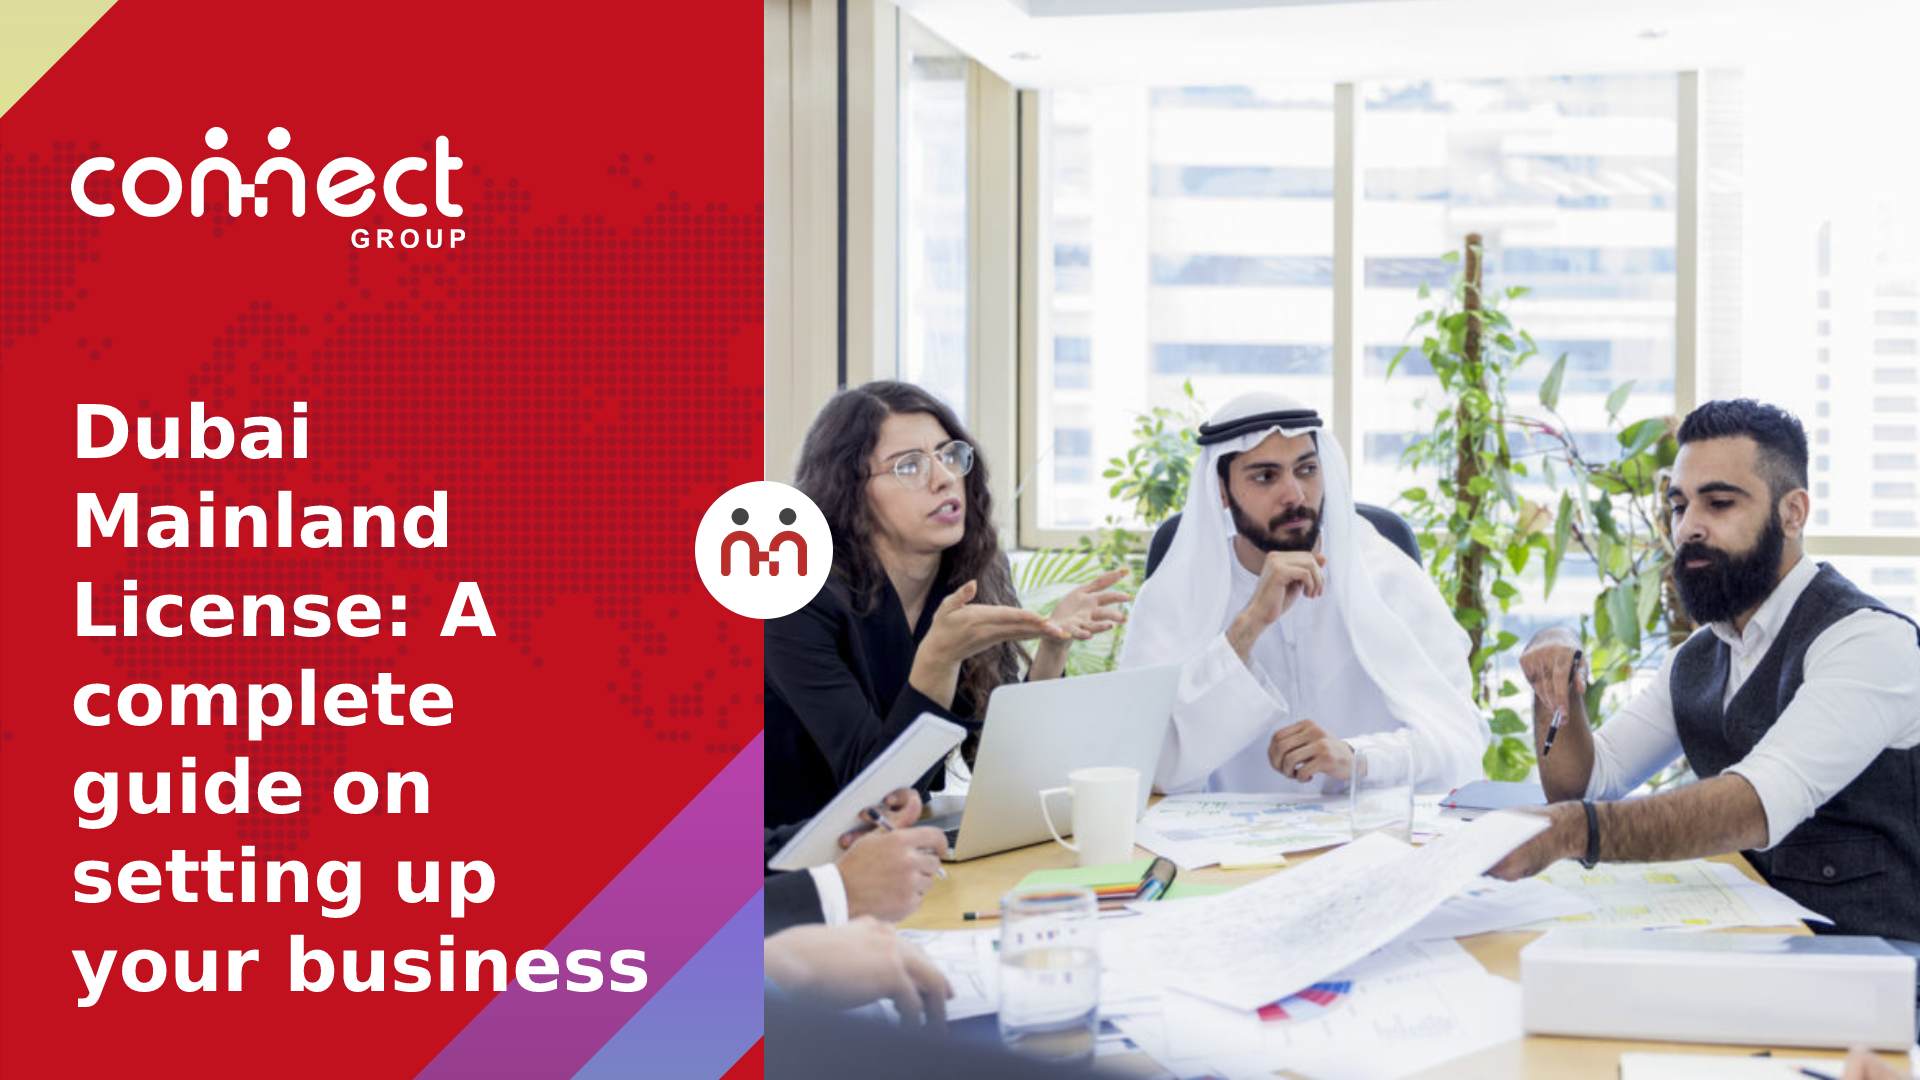 Dubai Mainland License: A complete guide on setting up your business